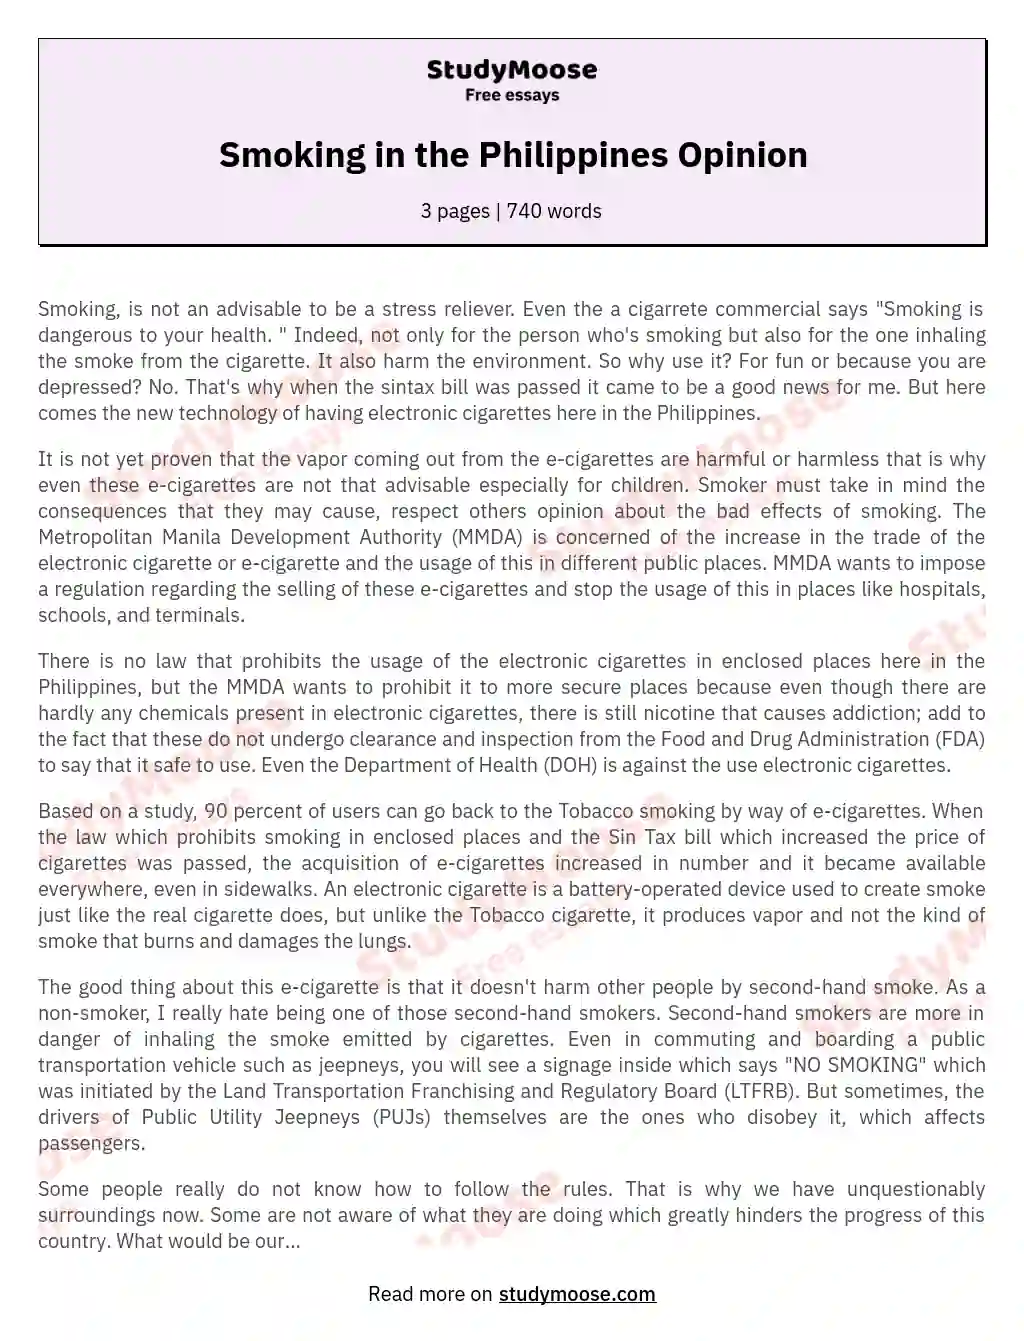 Smoking in the Philippines Opinion essay